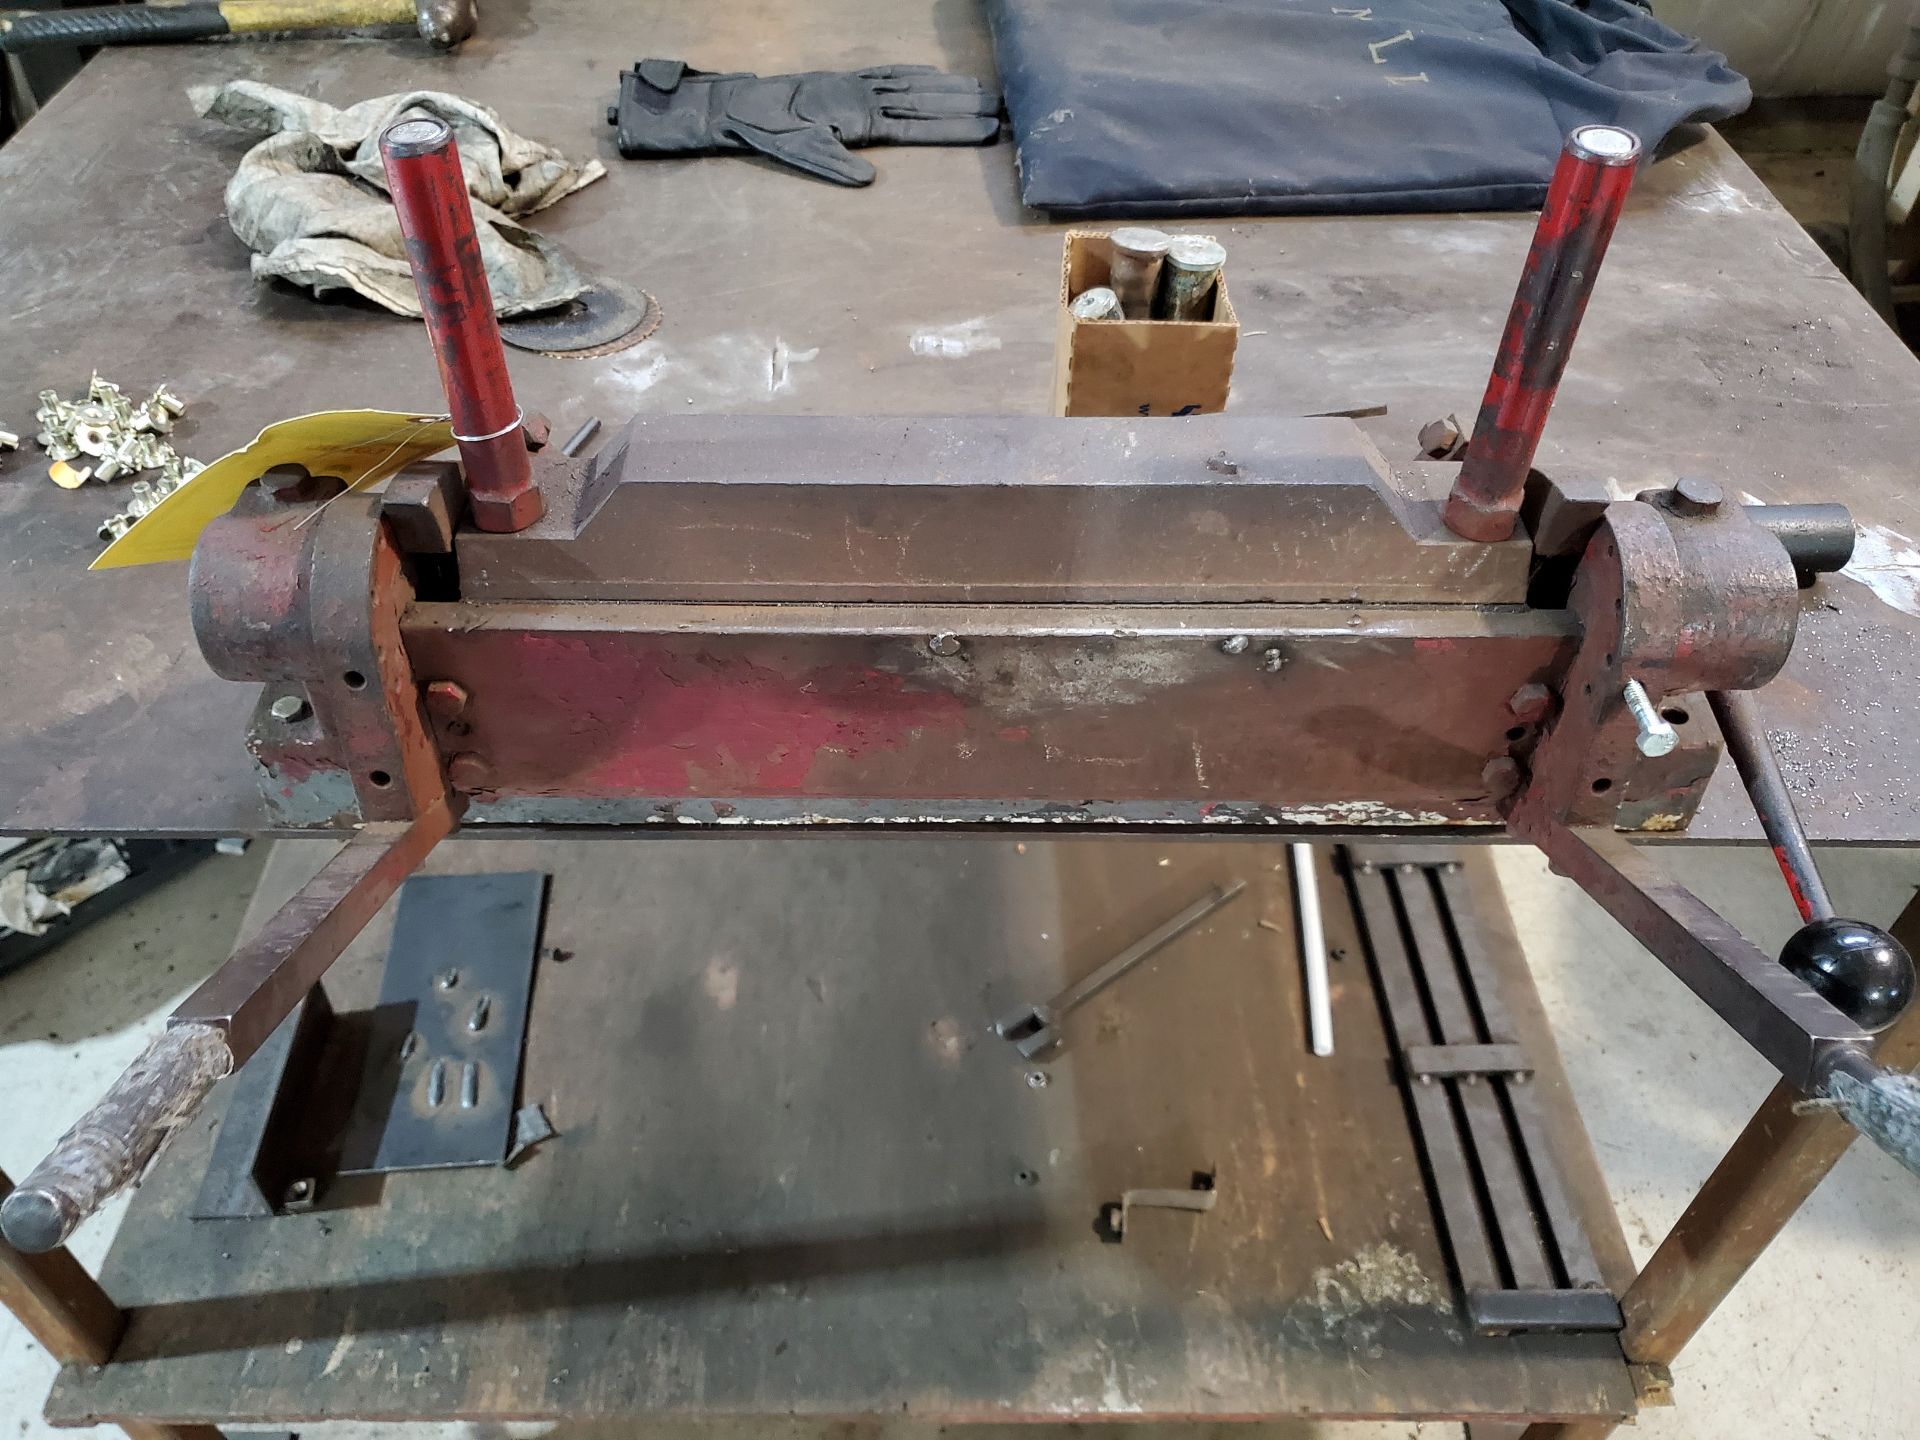 96'' X 48-1/2'' X 1/4'' STEEL WELDING TABLE WITH DI-ACRO NO.2 BENCH- TOP PAN BRAKE - Image 5 of 5